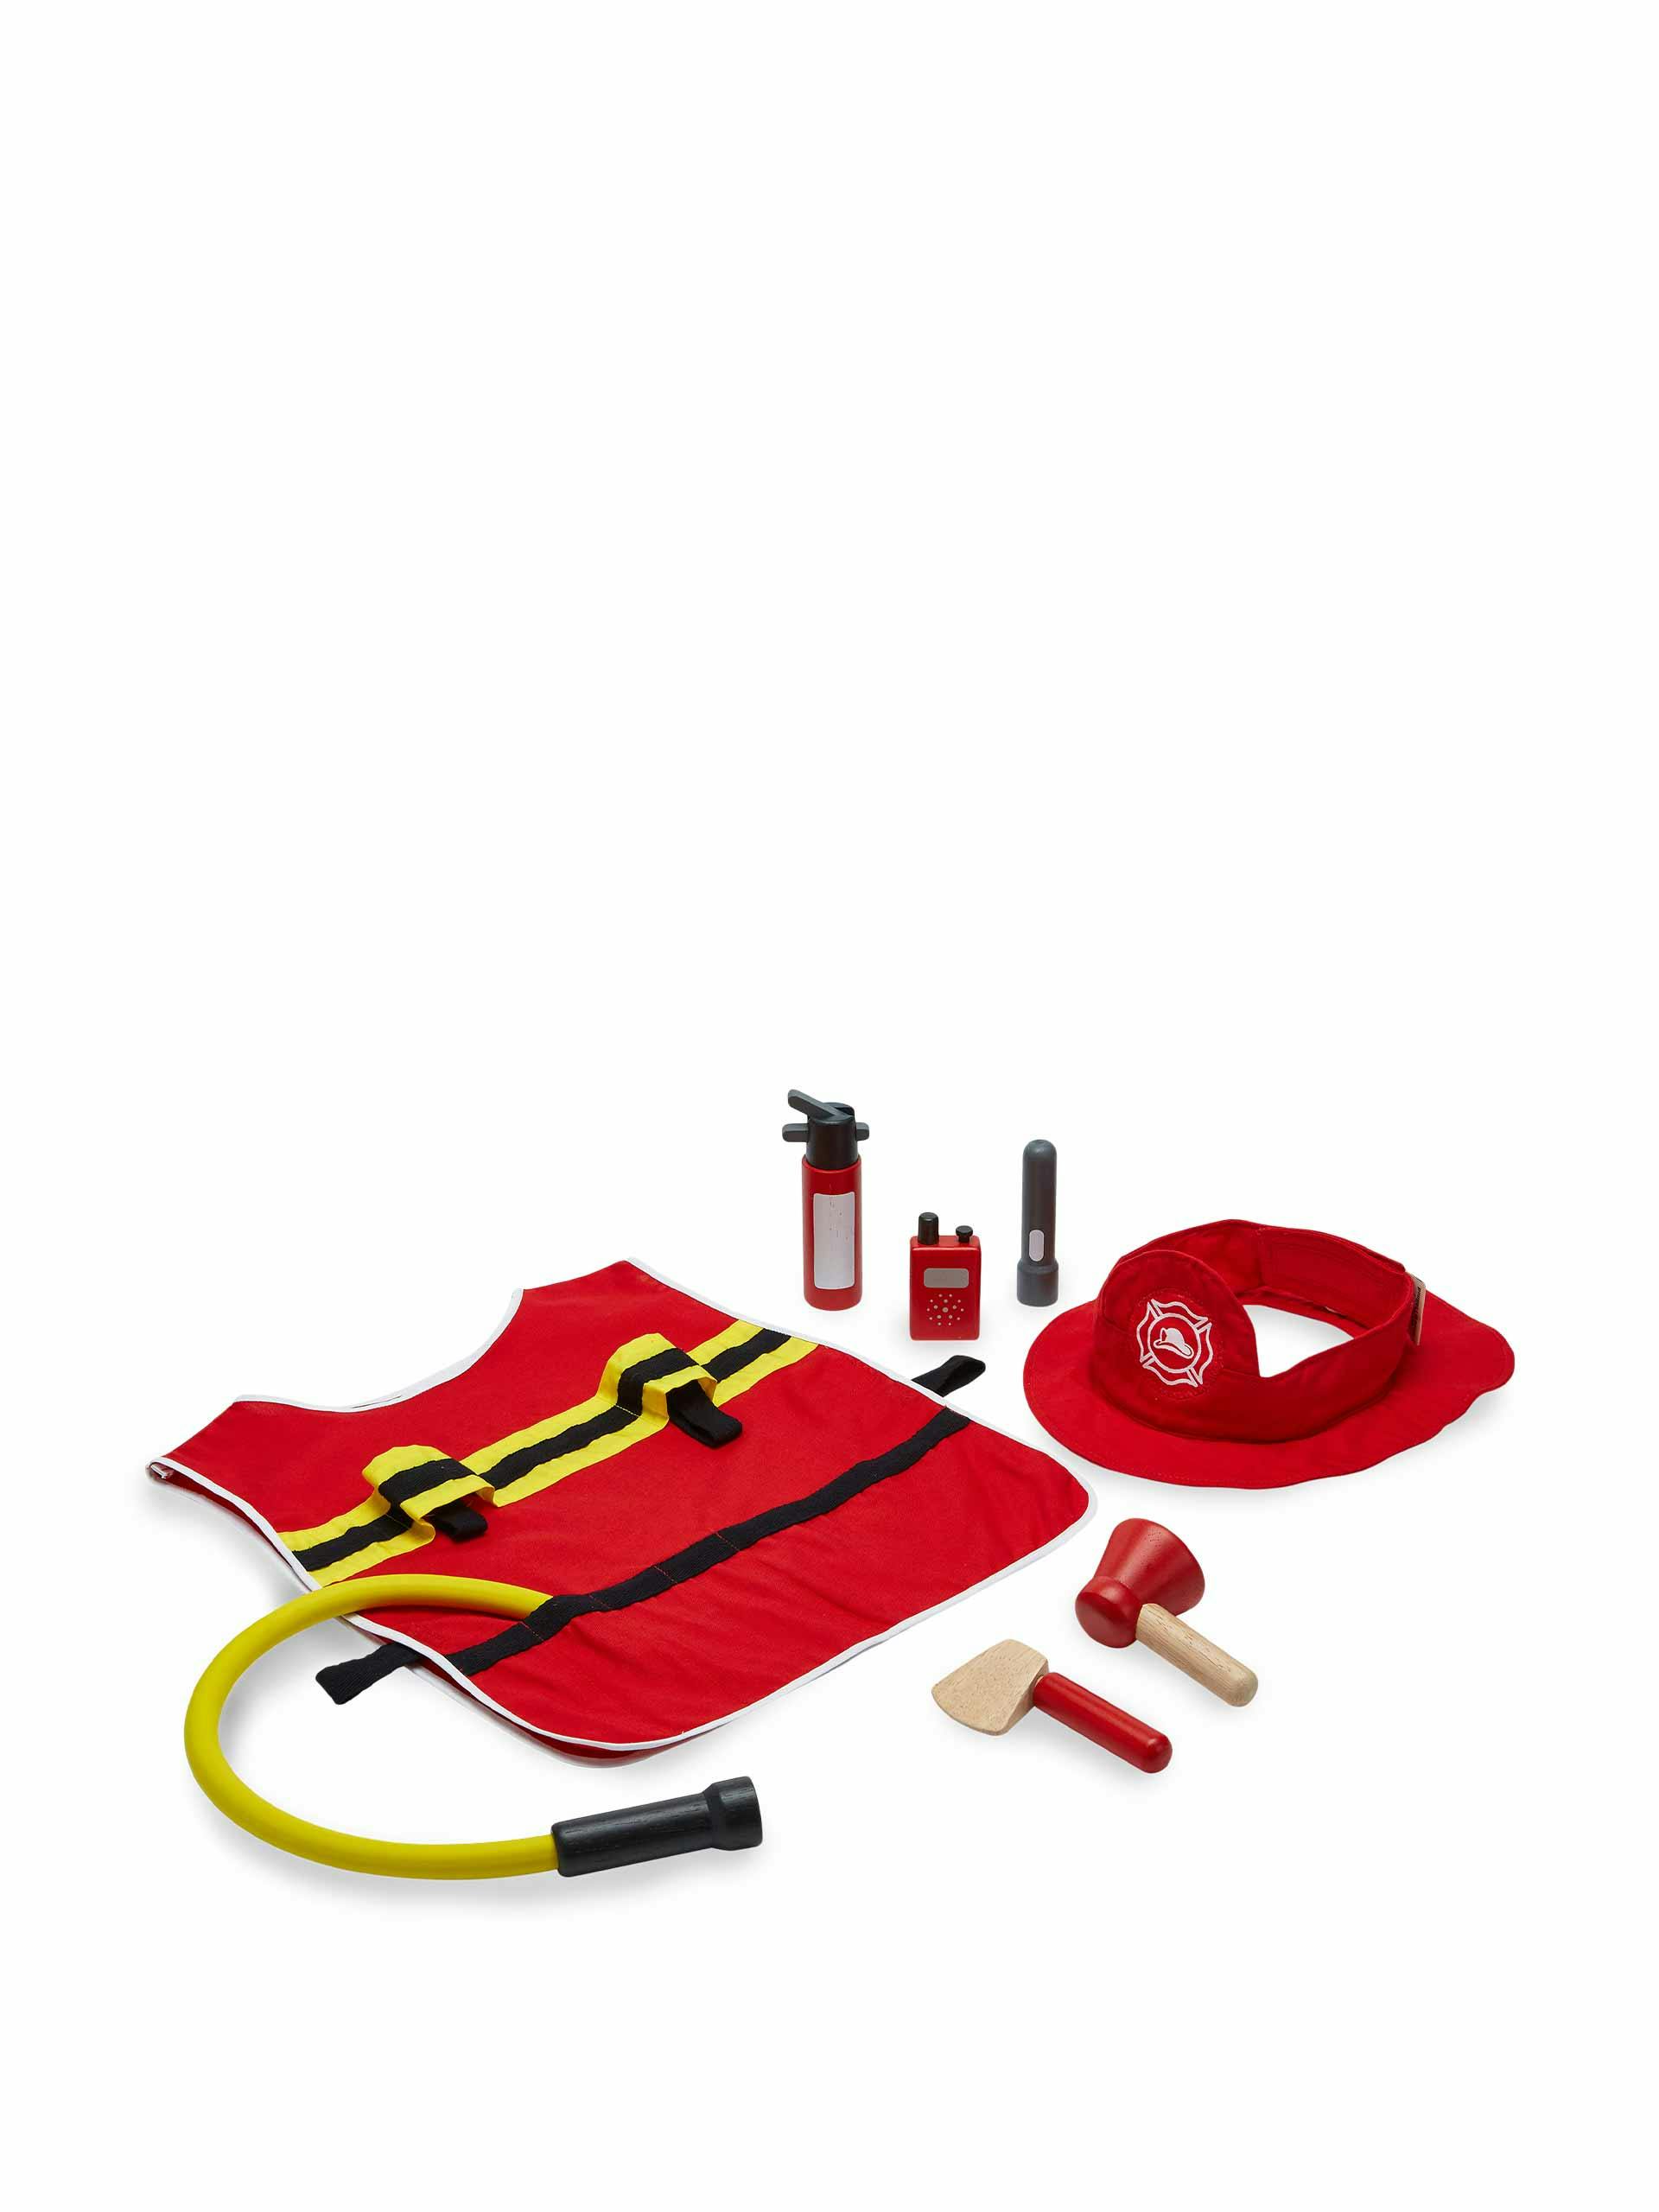 Fire fighter play set